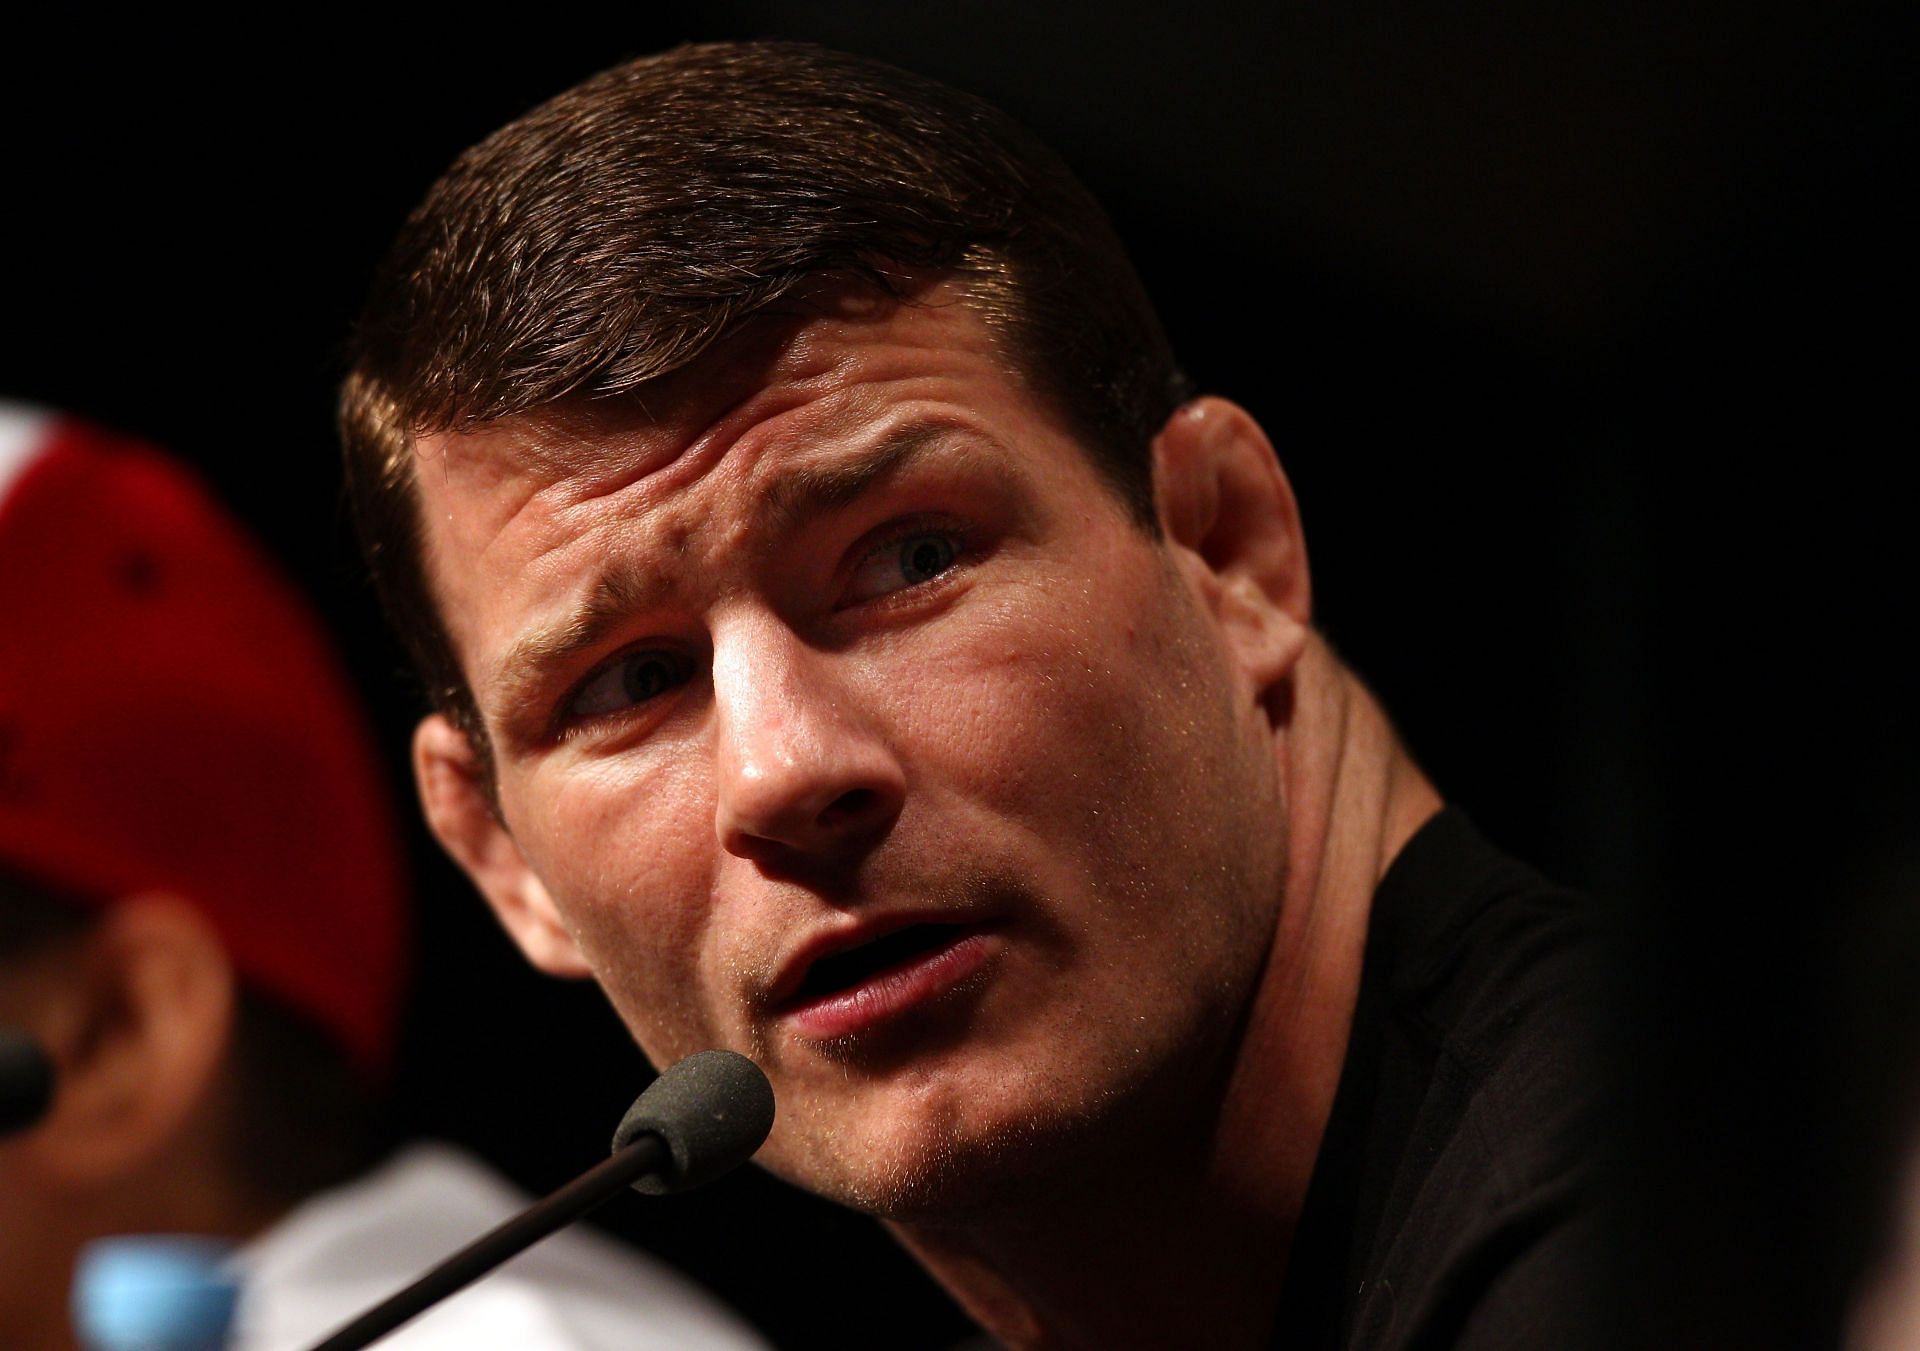 Michael Bisping at UFC Sydney 127 Press Conference